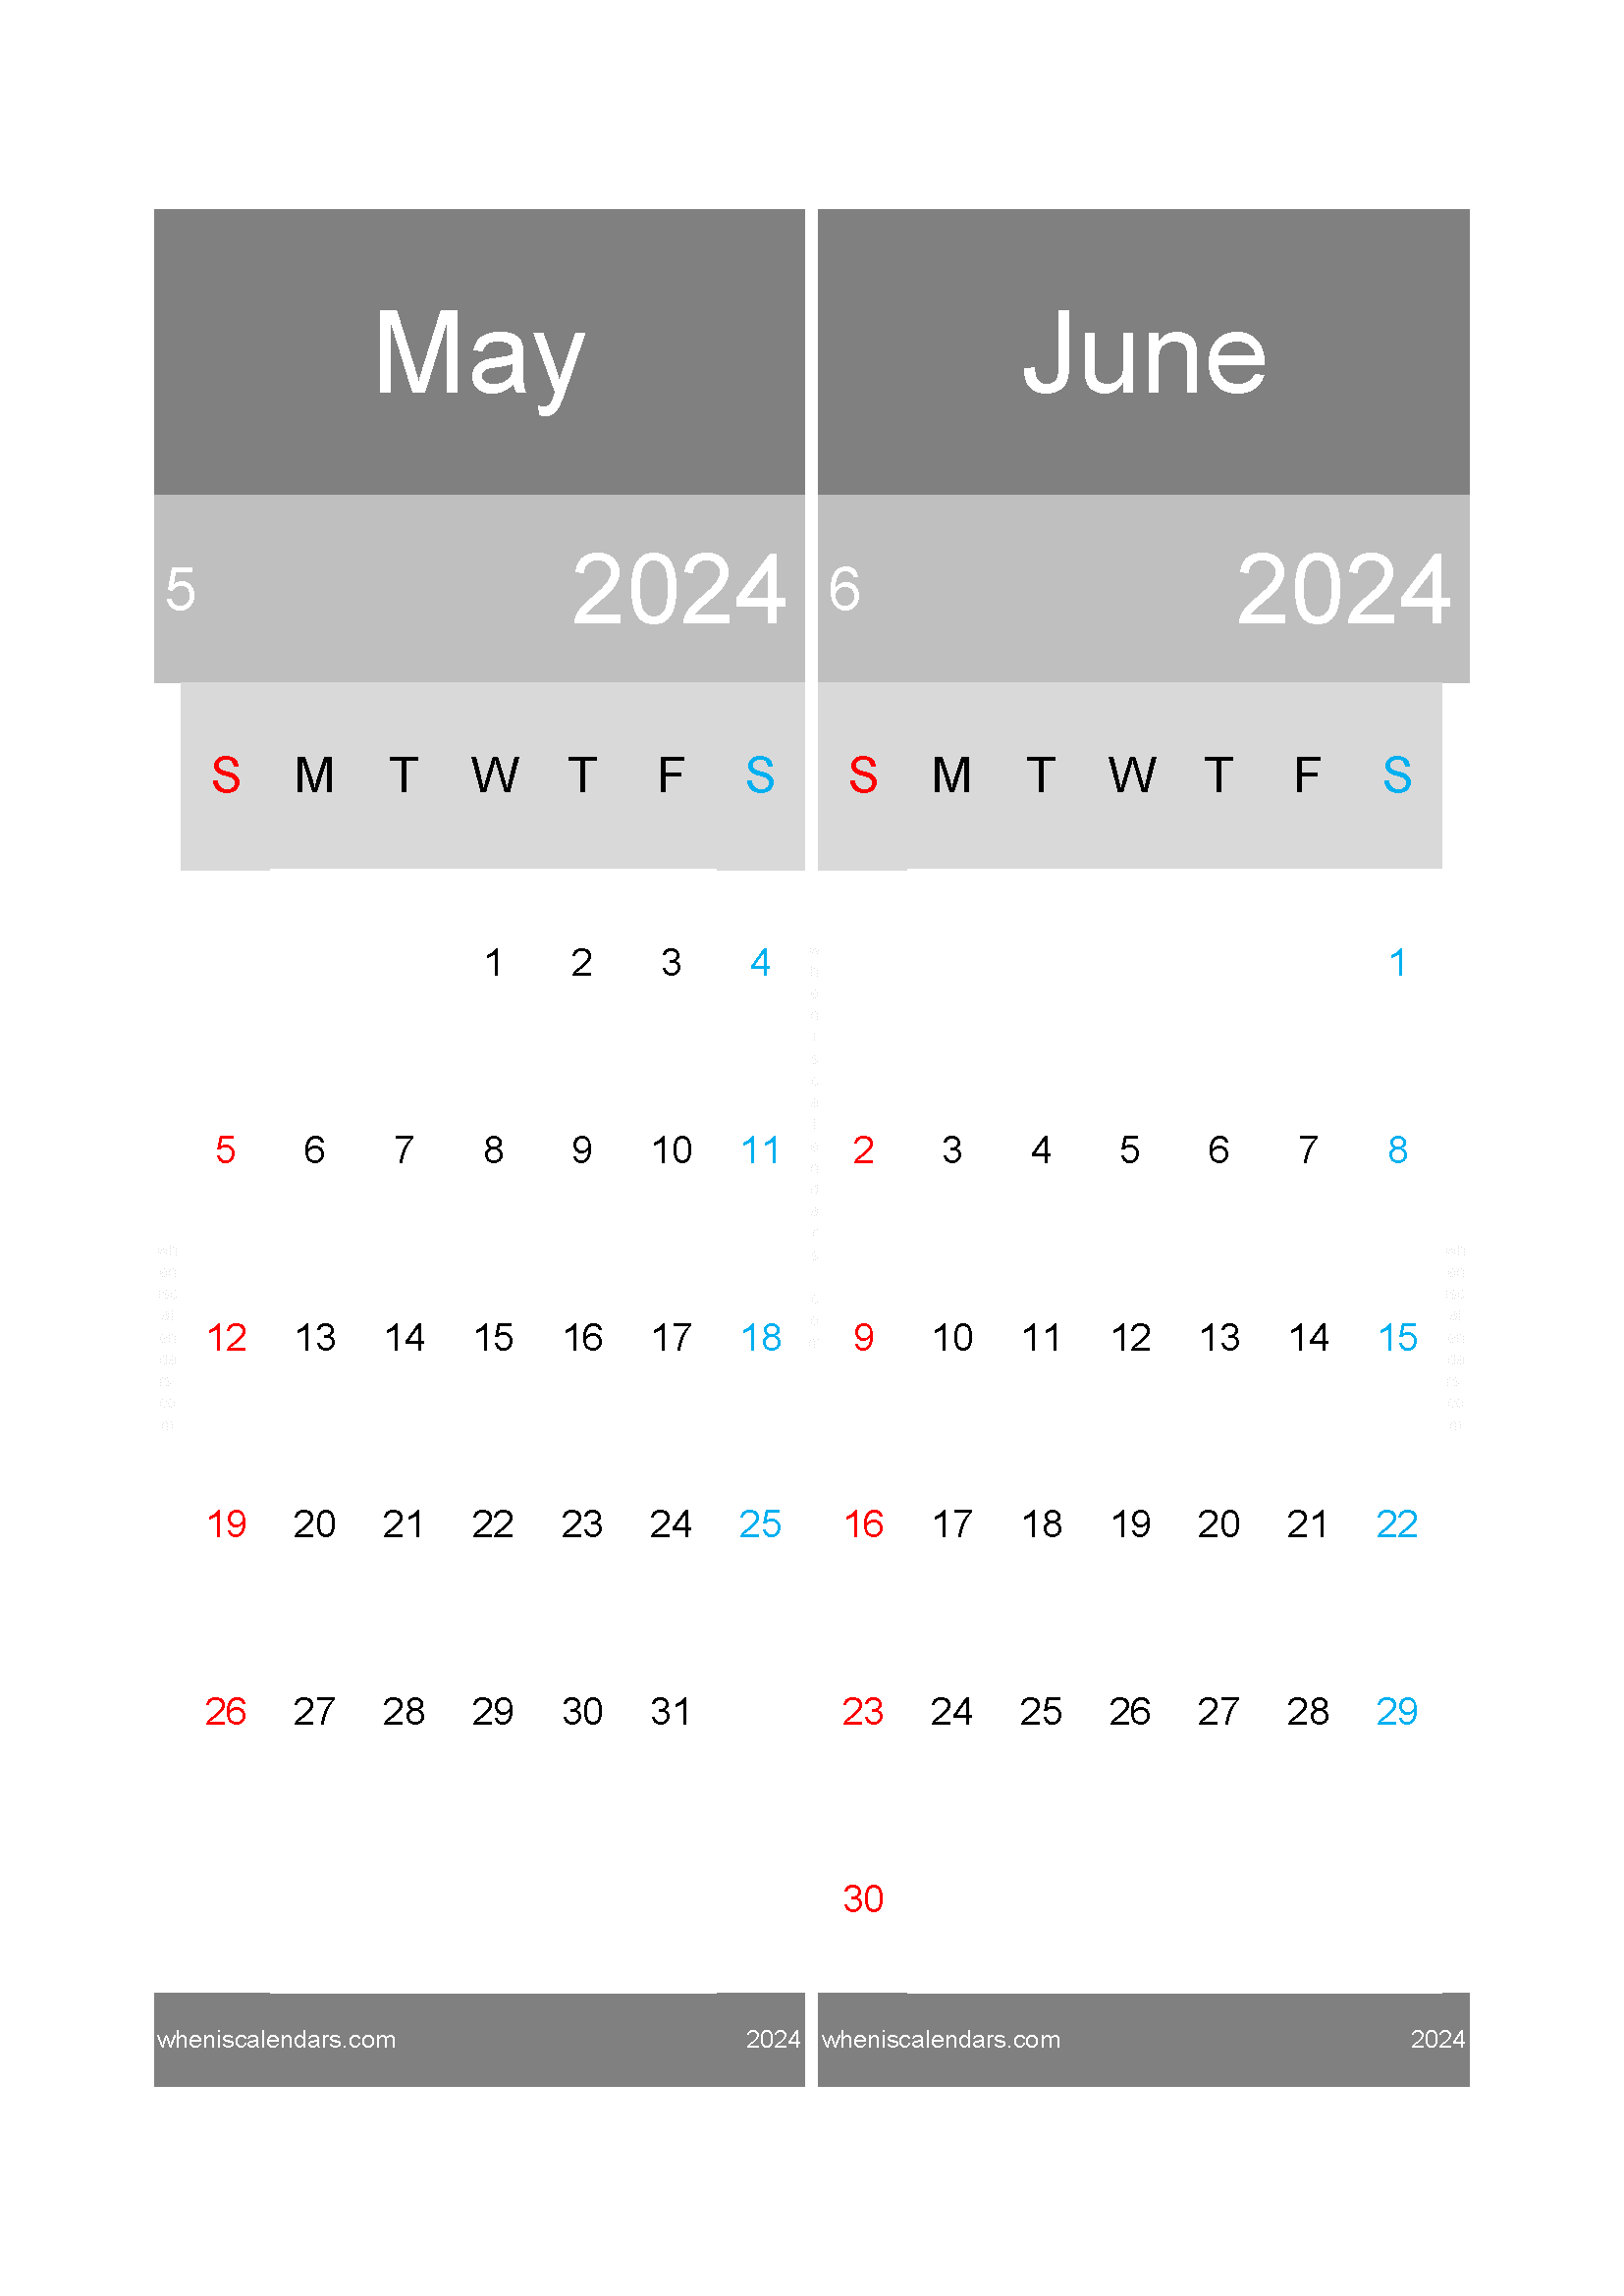 Download May and June calendar 2024 A4 MJ242020